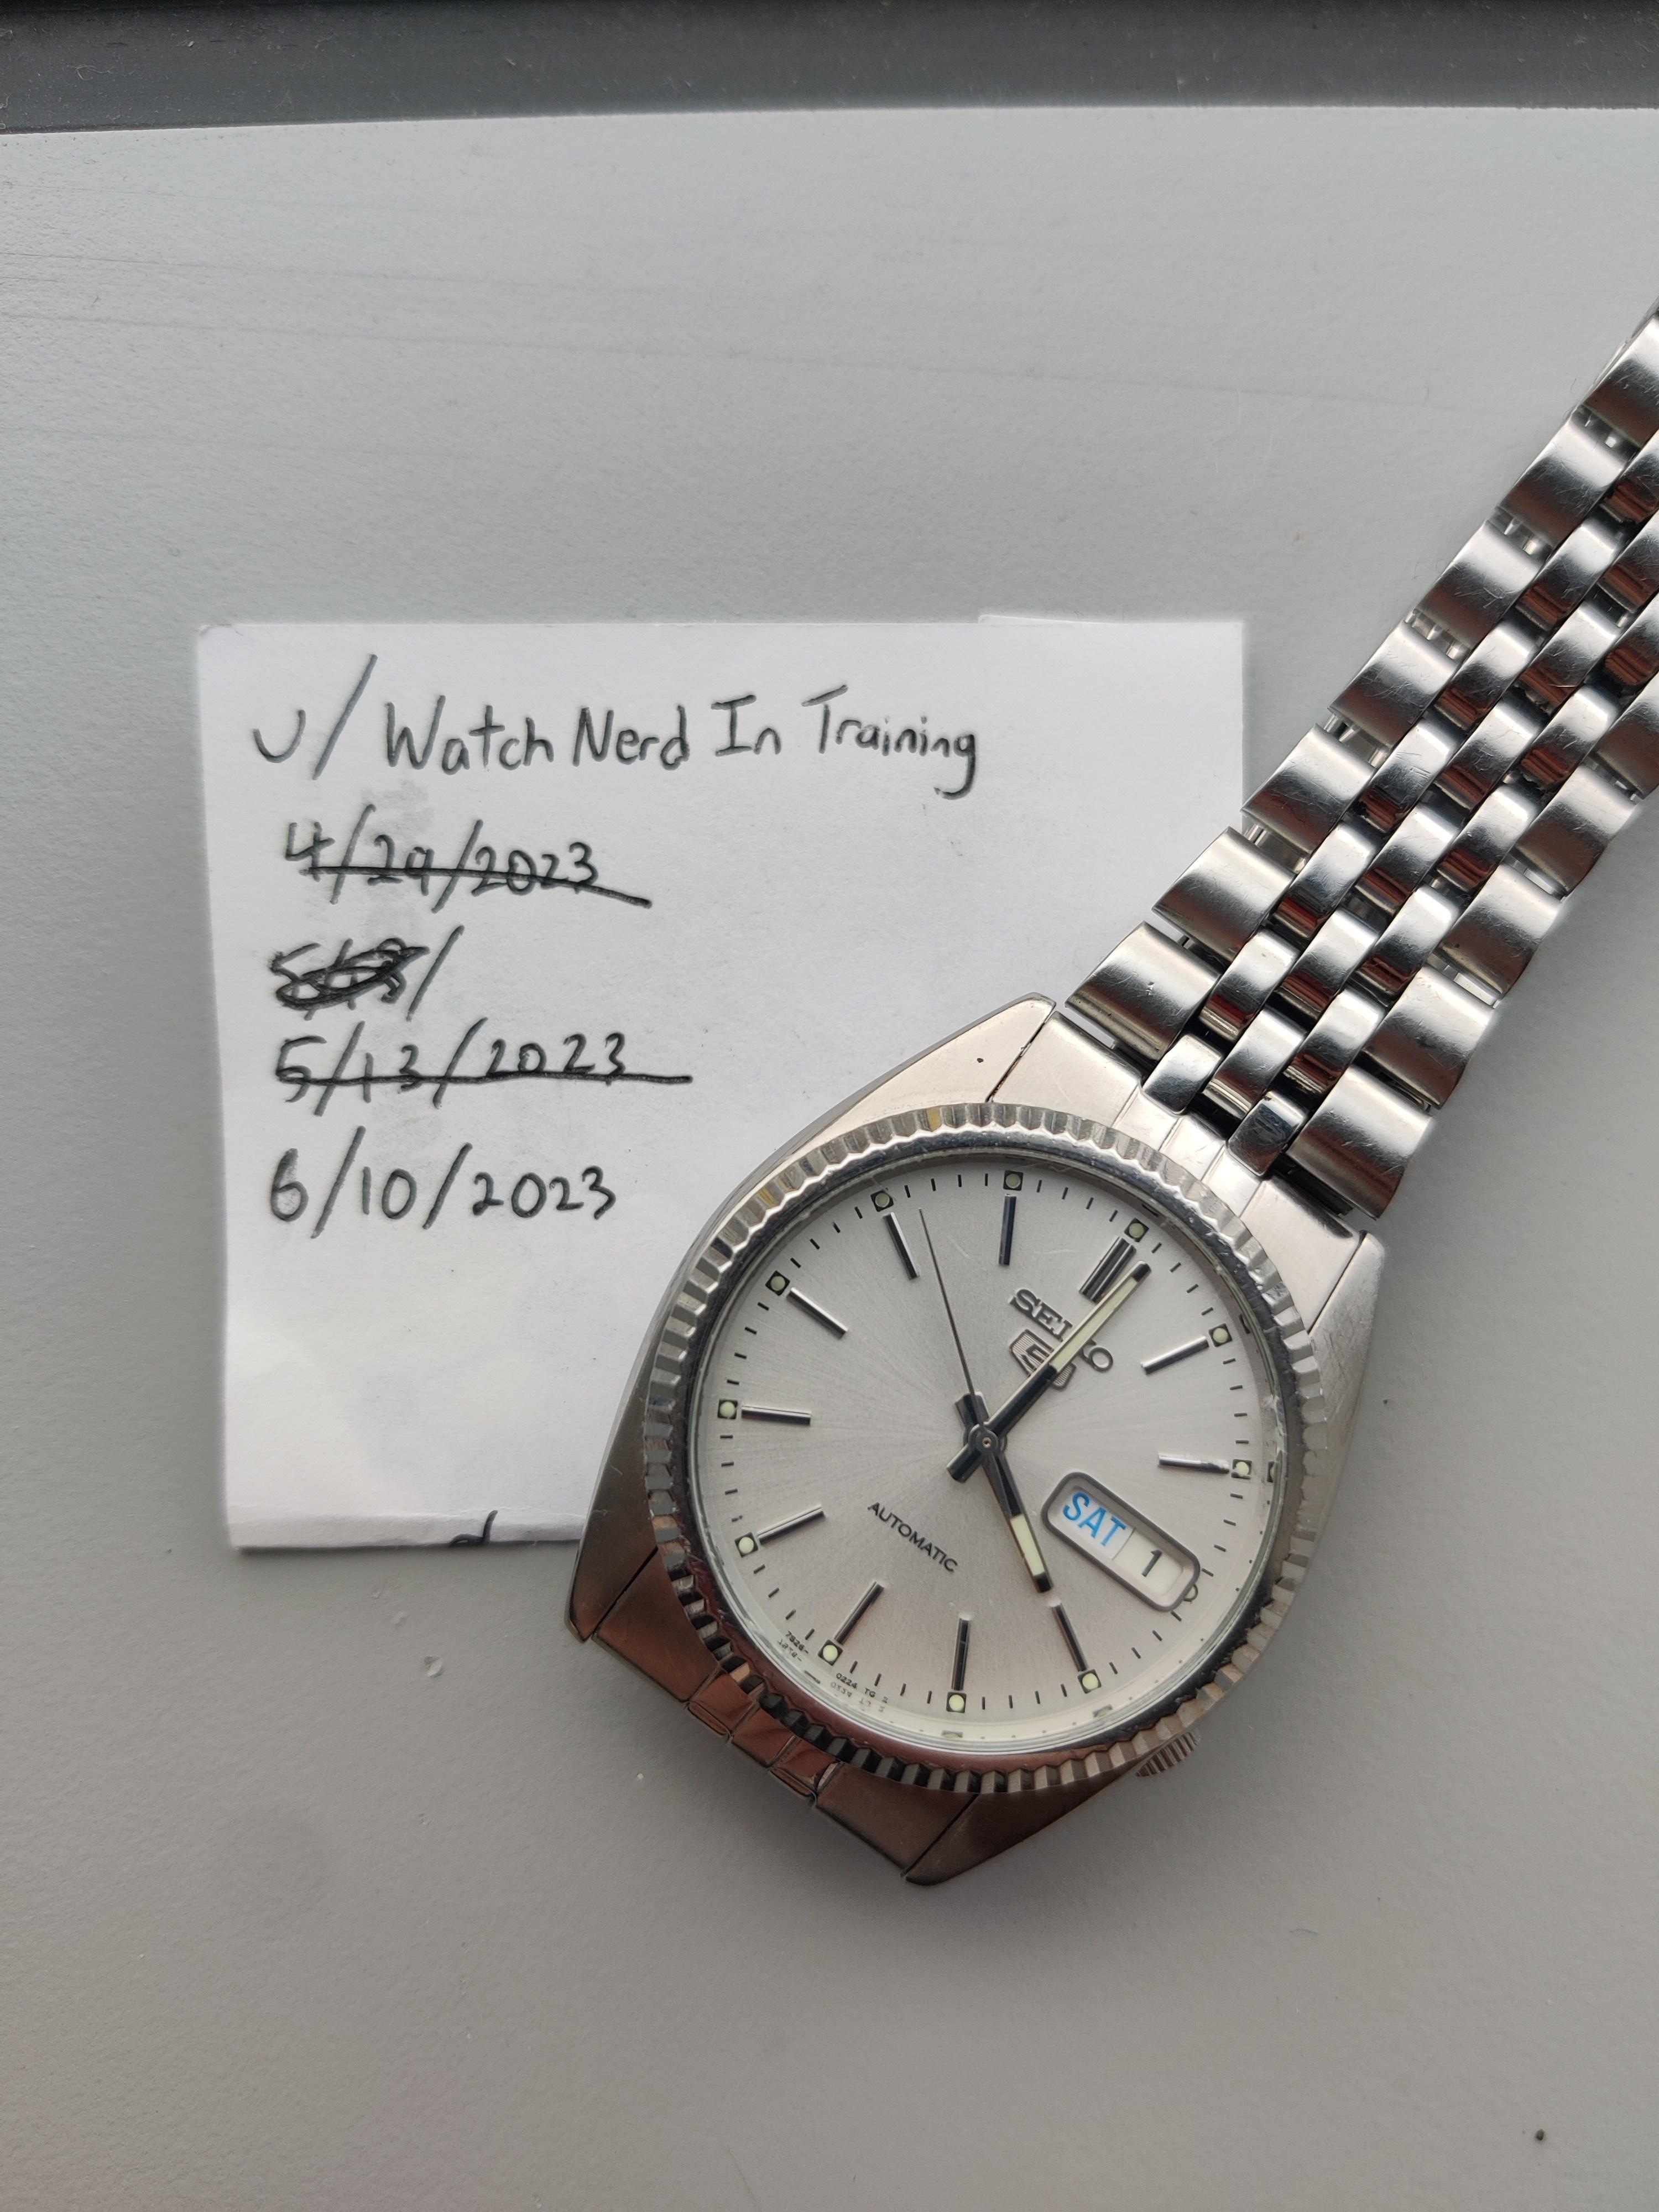 WTS] Seiko 5 SNXJ89 (7S26-0500) - Reduced | WatchCharts Marketplace